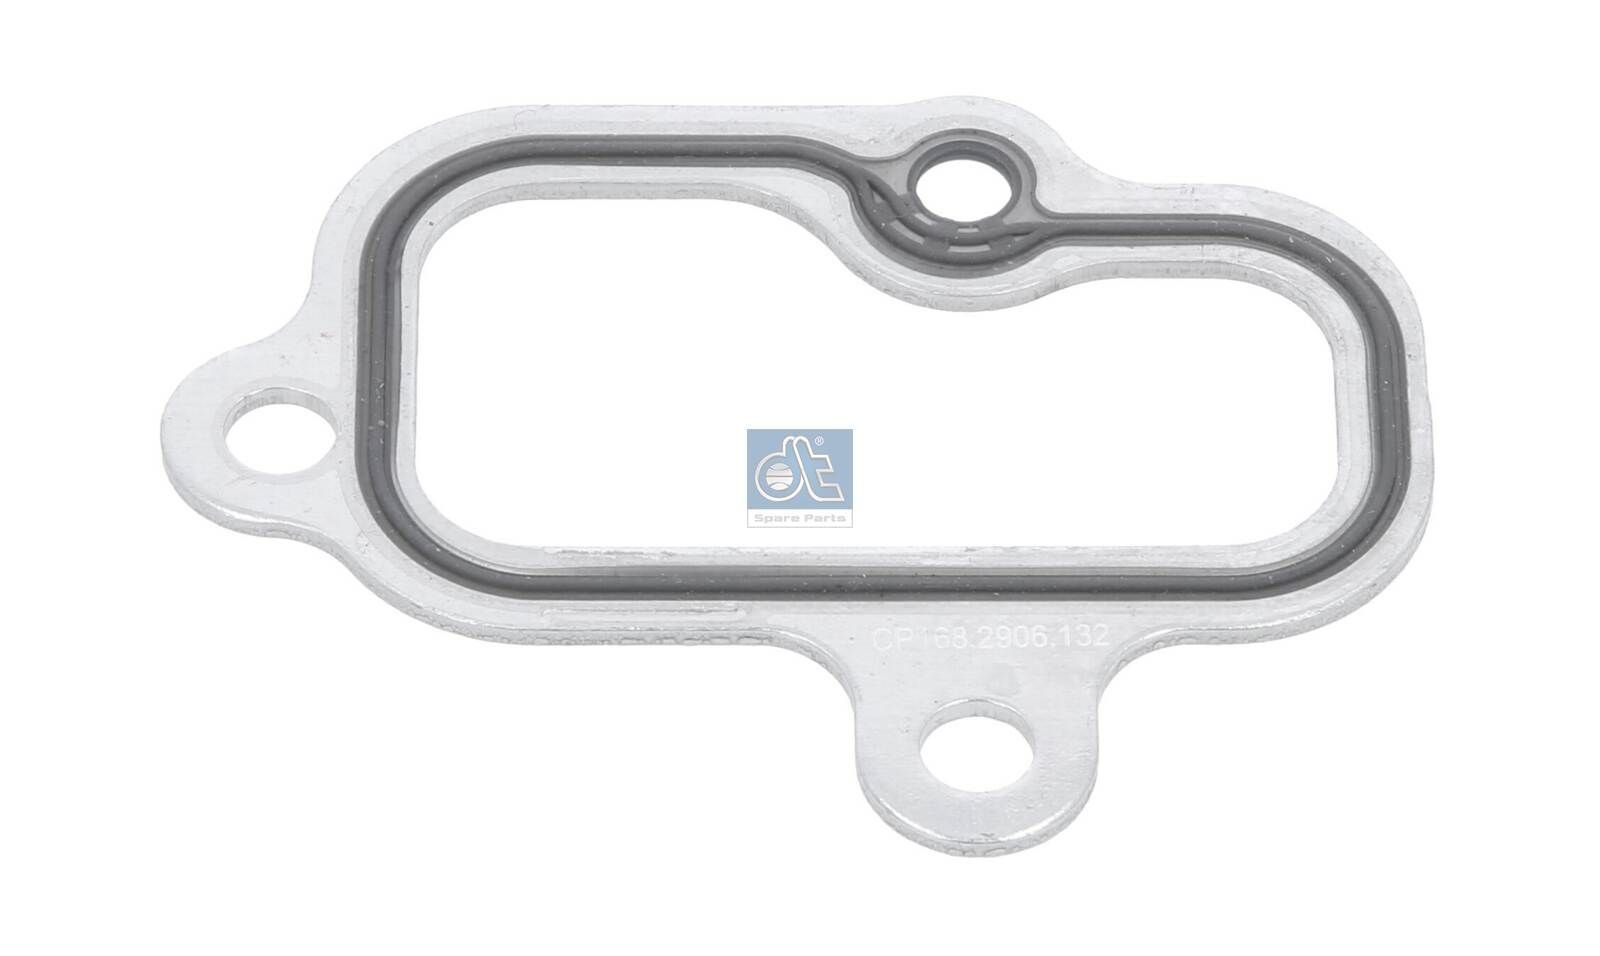 DT Spare Parts 3.18132 Exhaust manifold gasket 51089020202